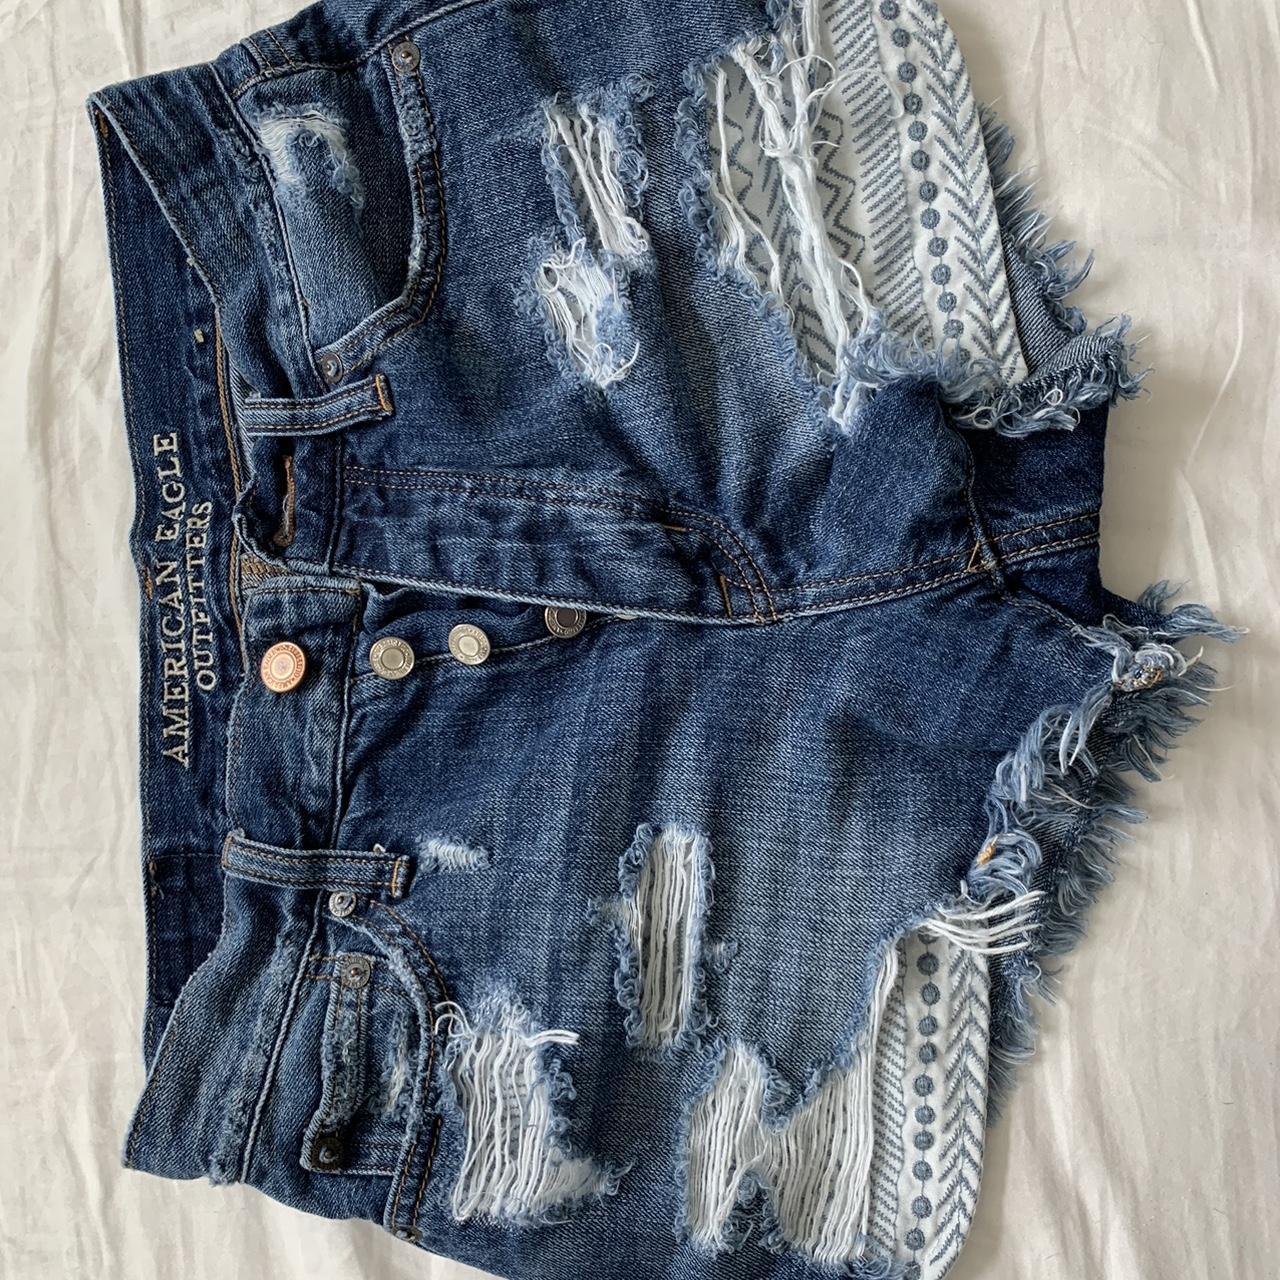 american eagle jean shorts worn once too small for me - Depop